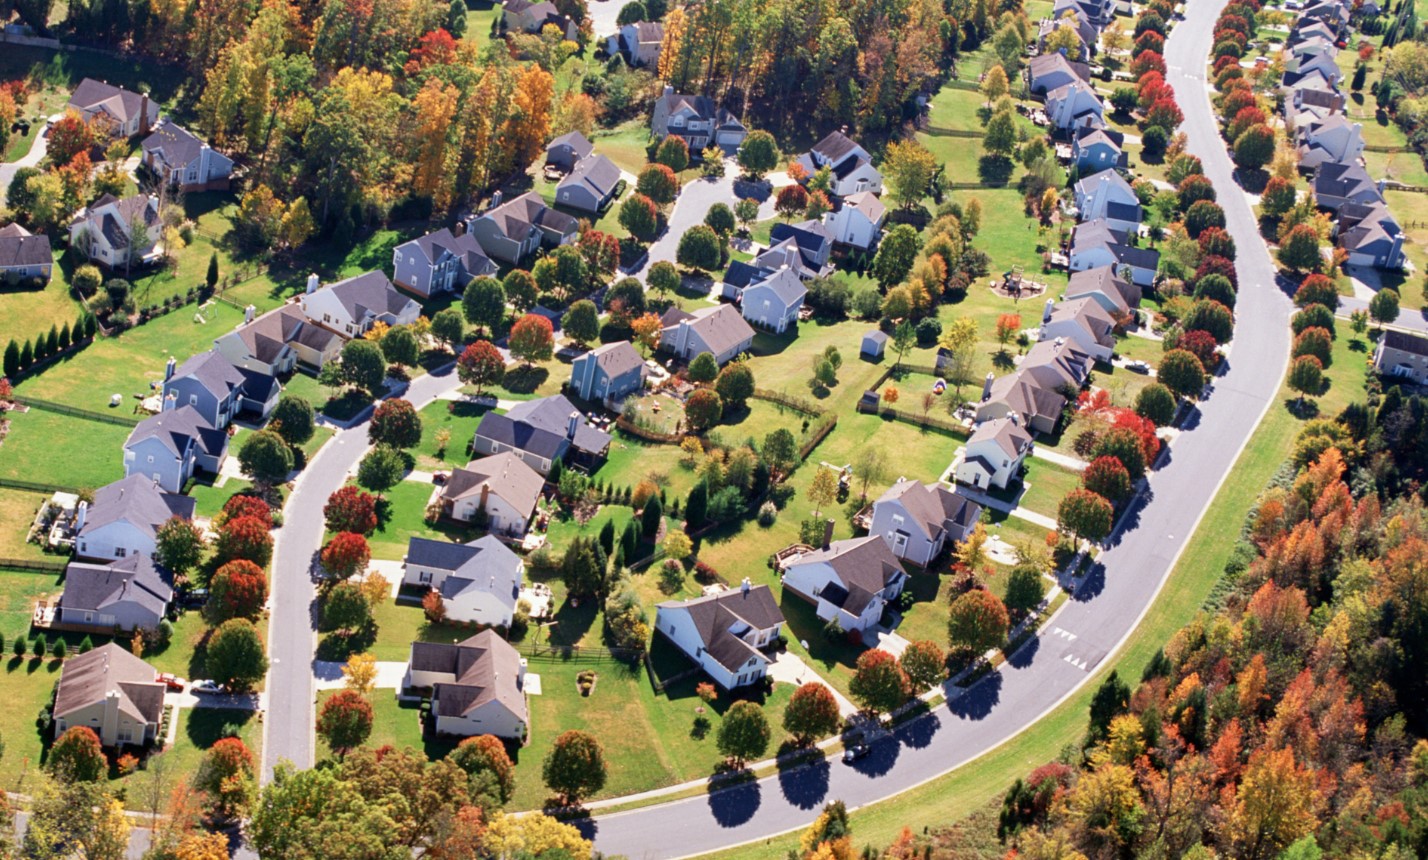 Why Professionally Shot Aerial Photos and Videos Can Help You Sell Your Home